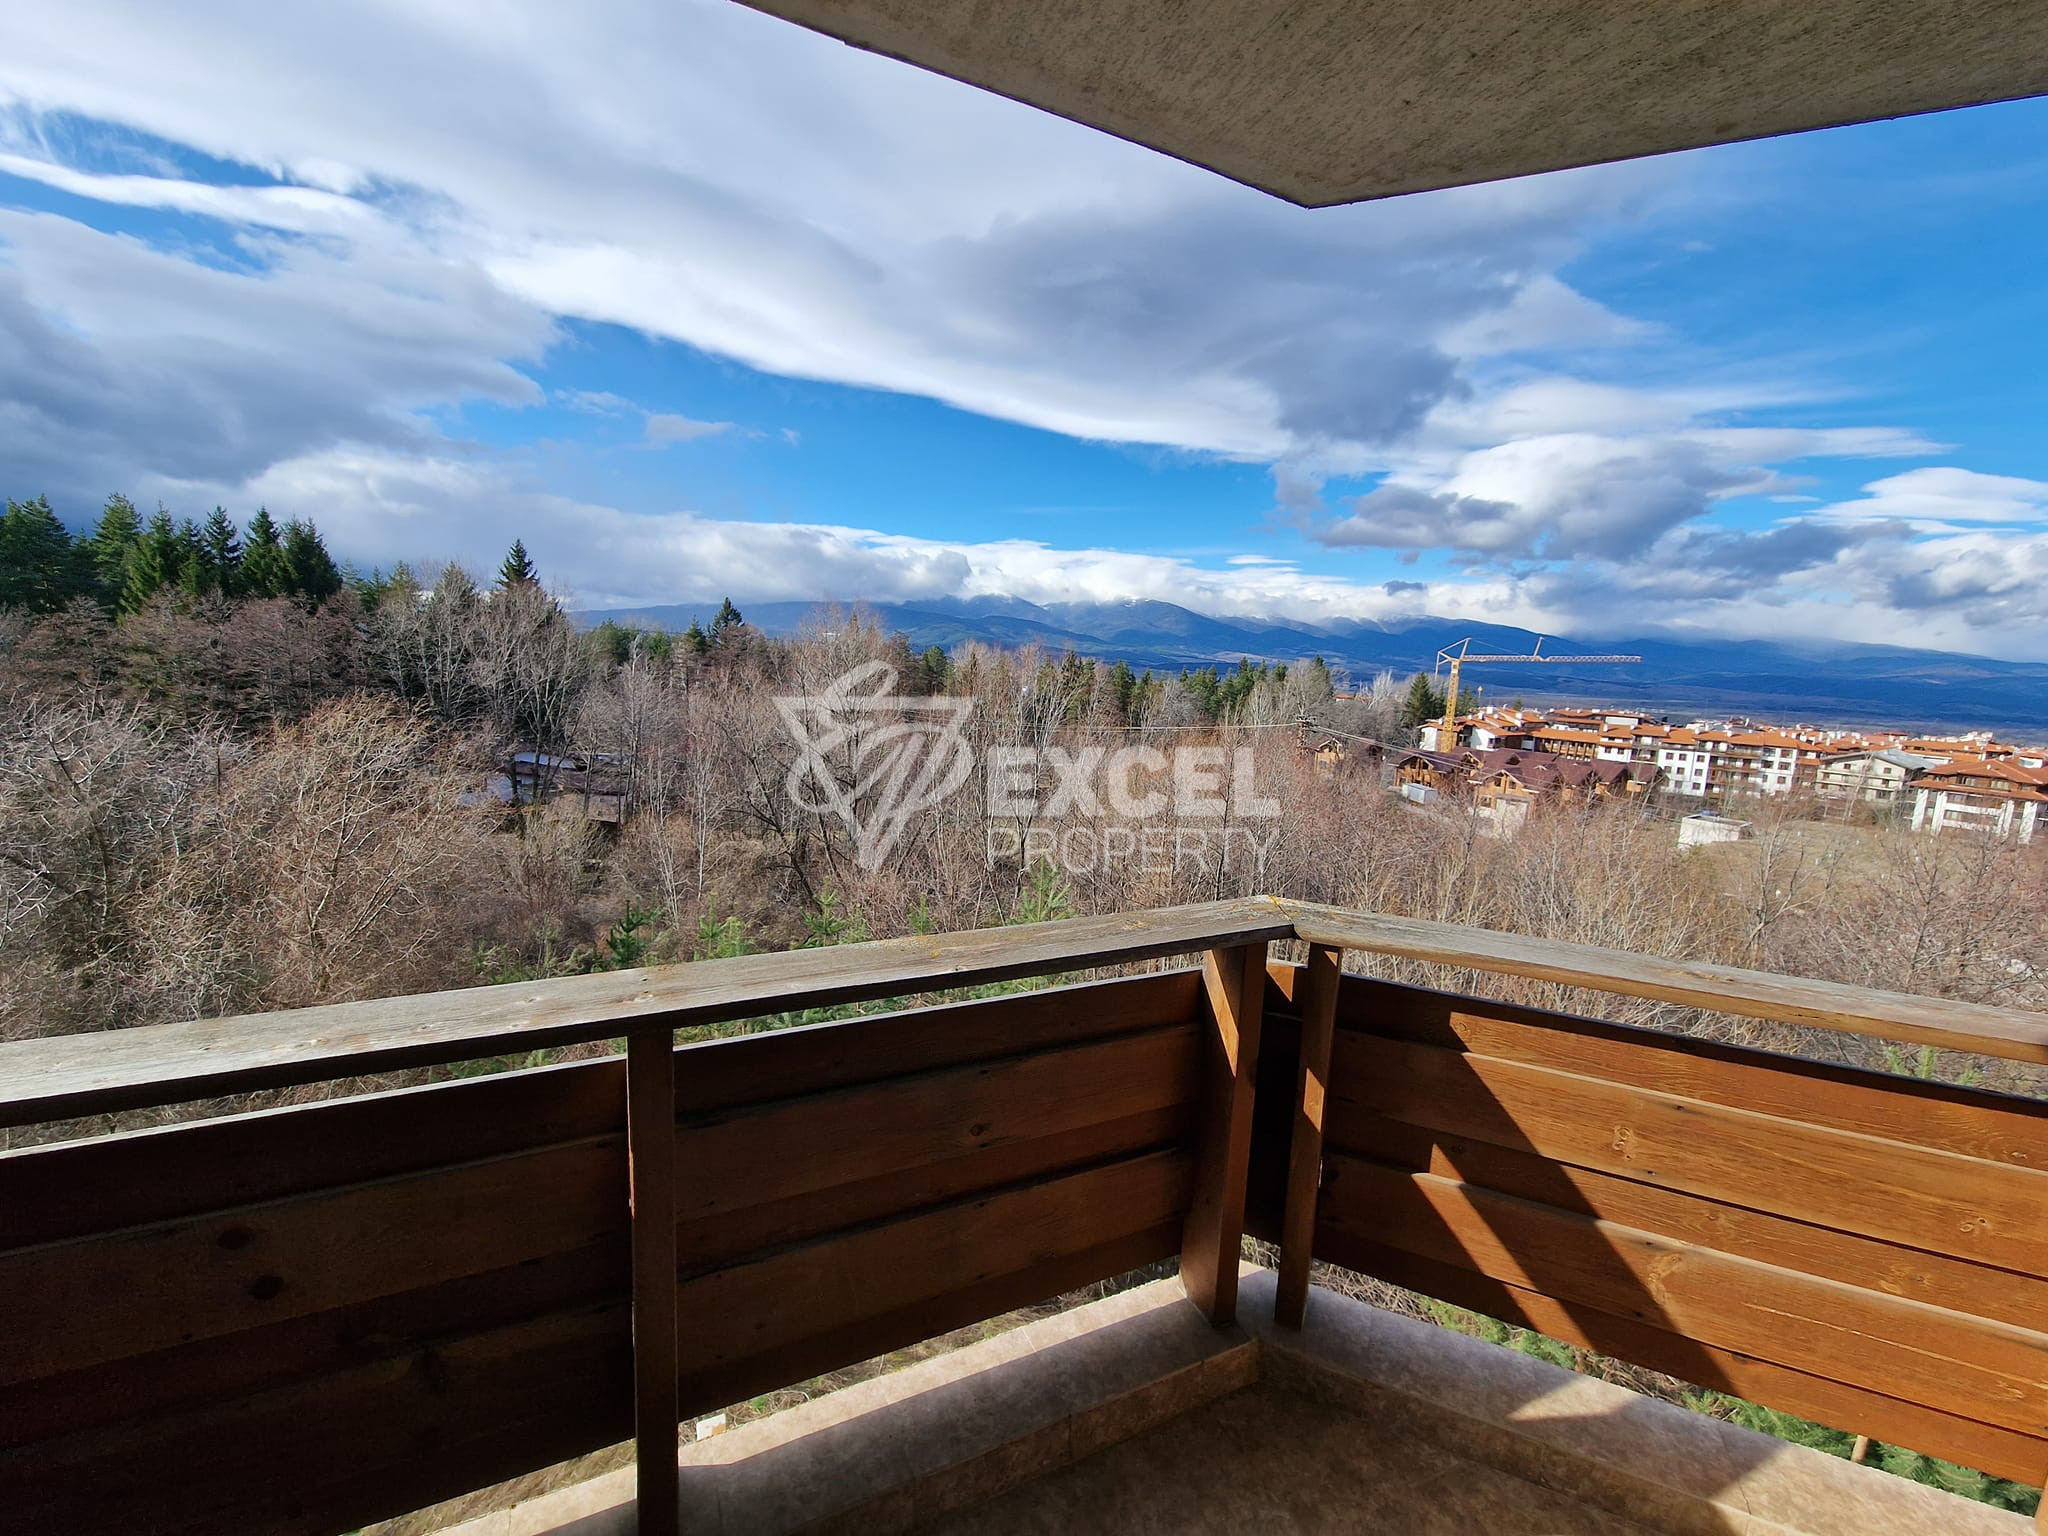 One-bedroom apartment with underground parking space and low maintenance fee for sale in Bansko